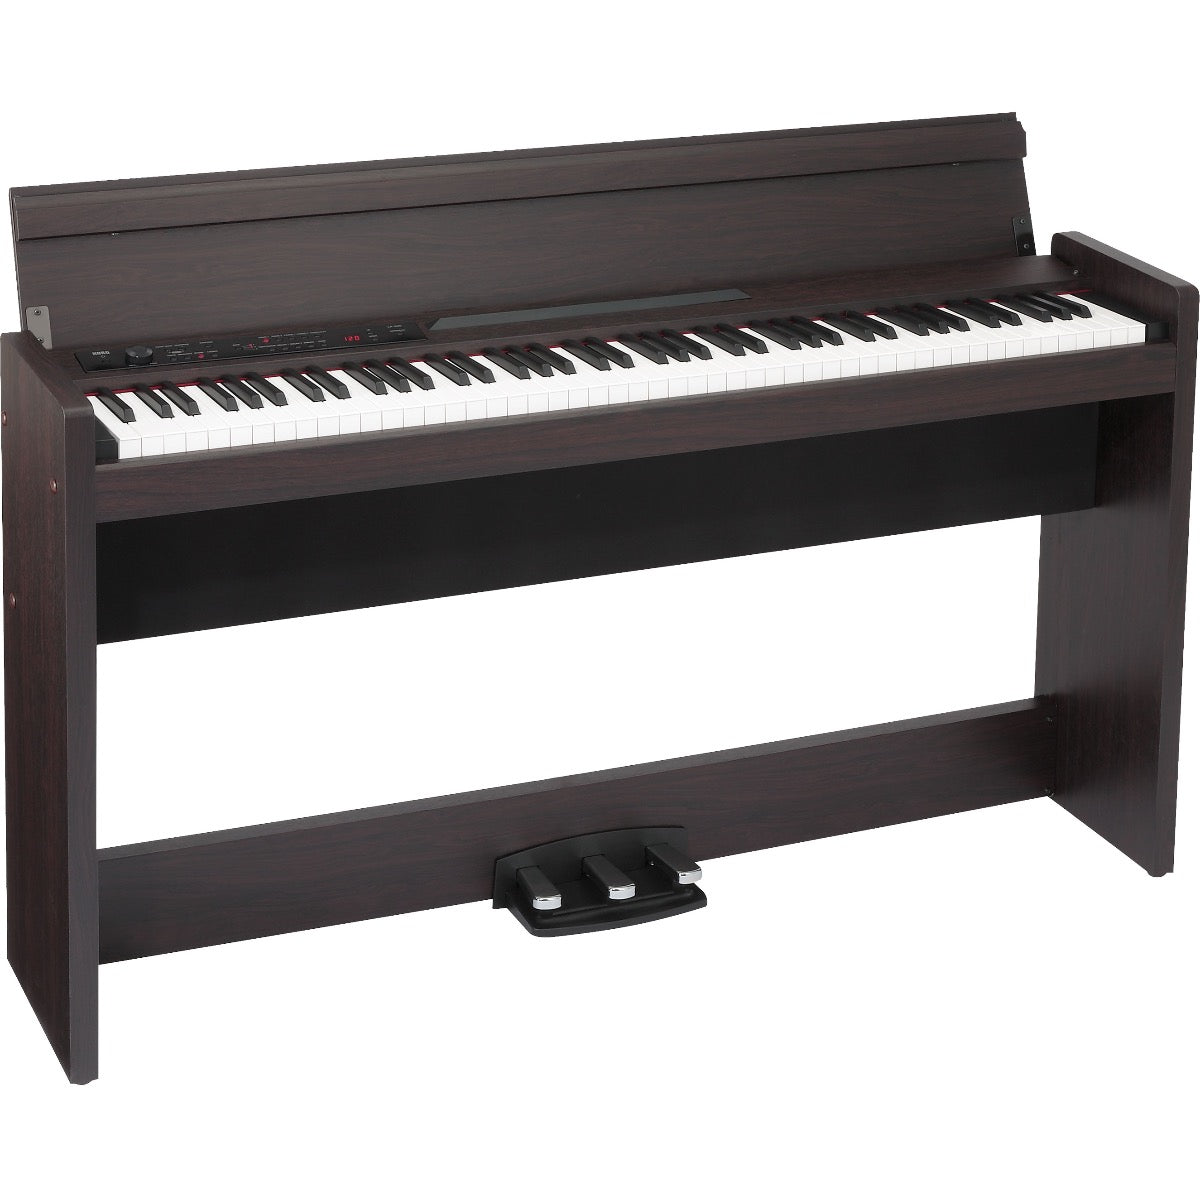 3/4 view of Korg LP-380U Digital Piano - Rosewood showing top, front and left side